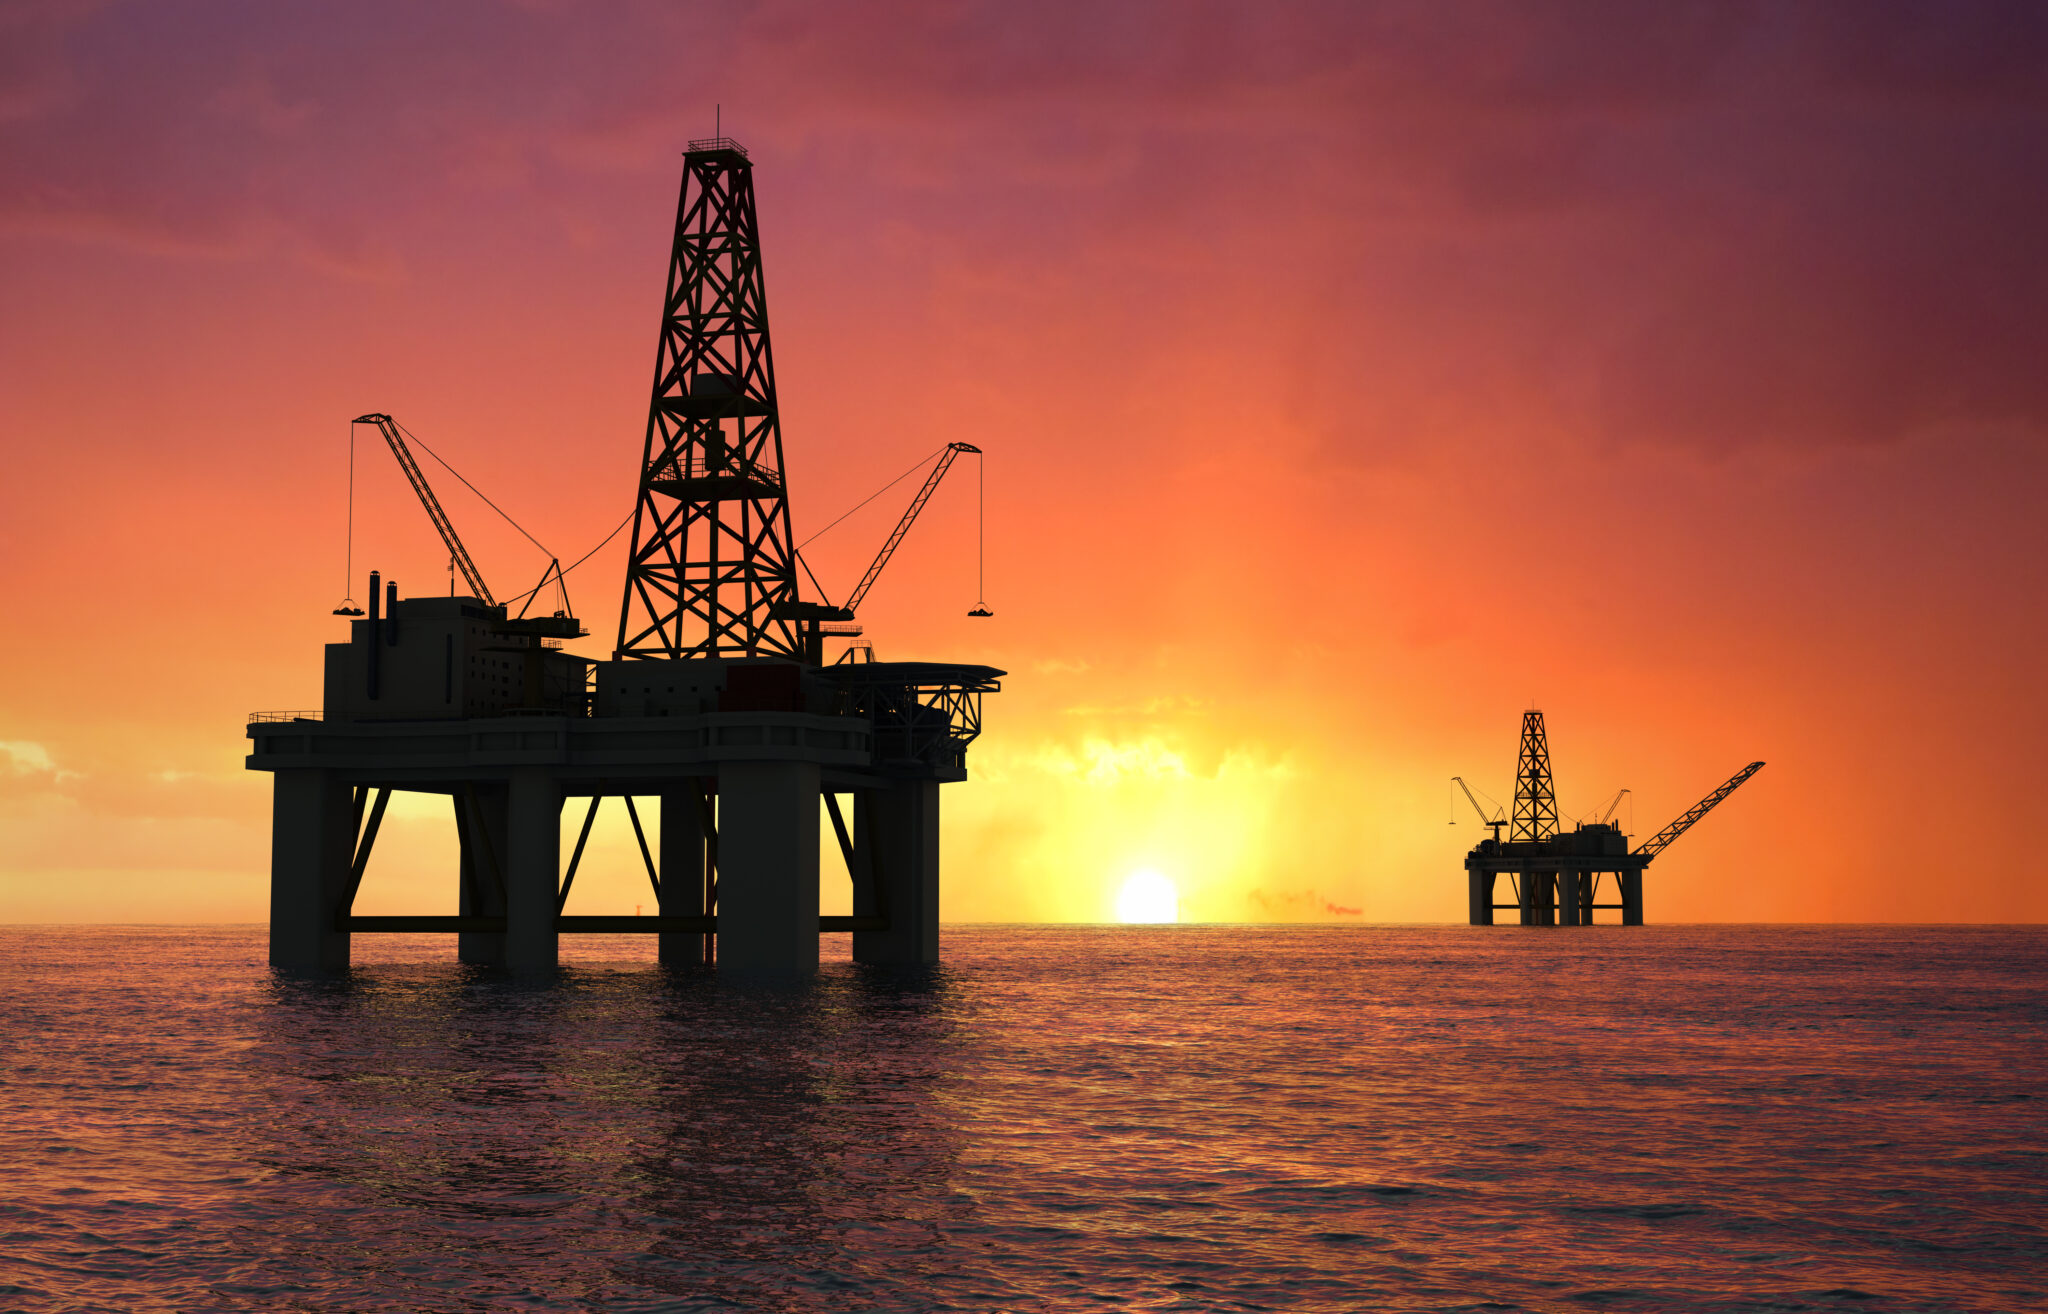 MMX comes out on top with topside network contract win for IV Offshore and Energy featured image